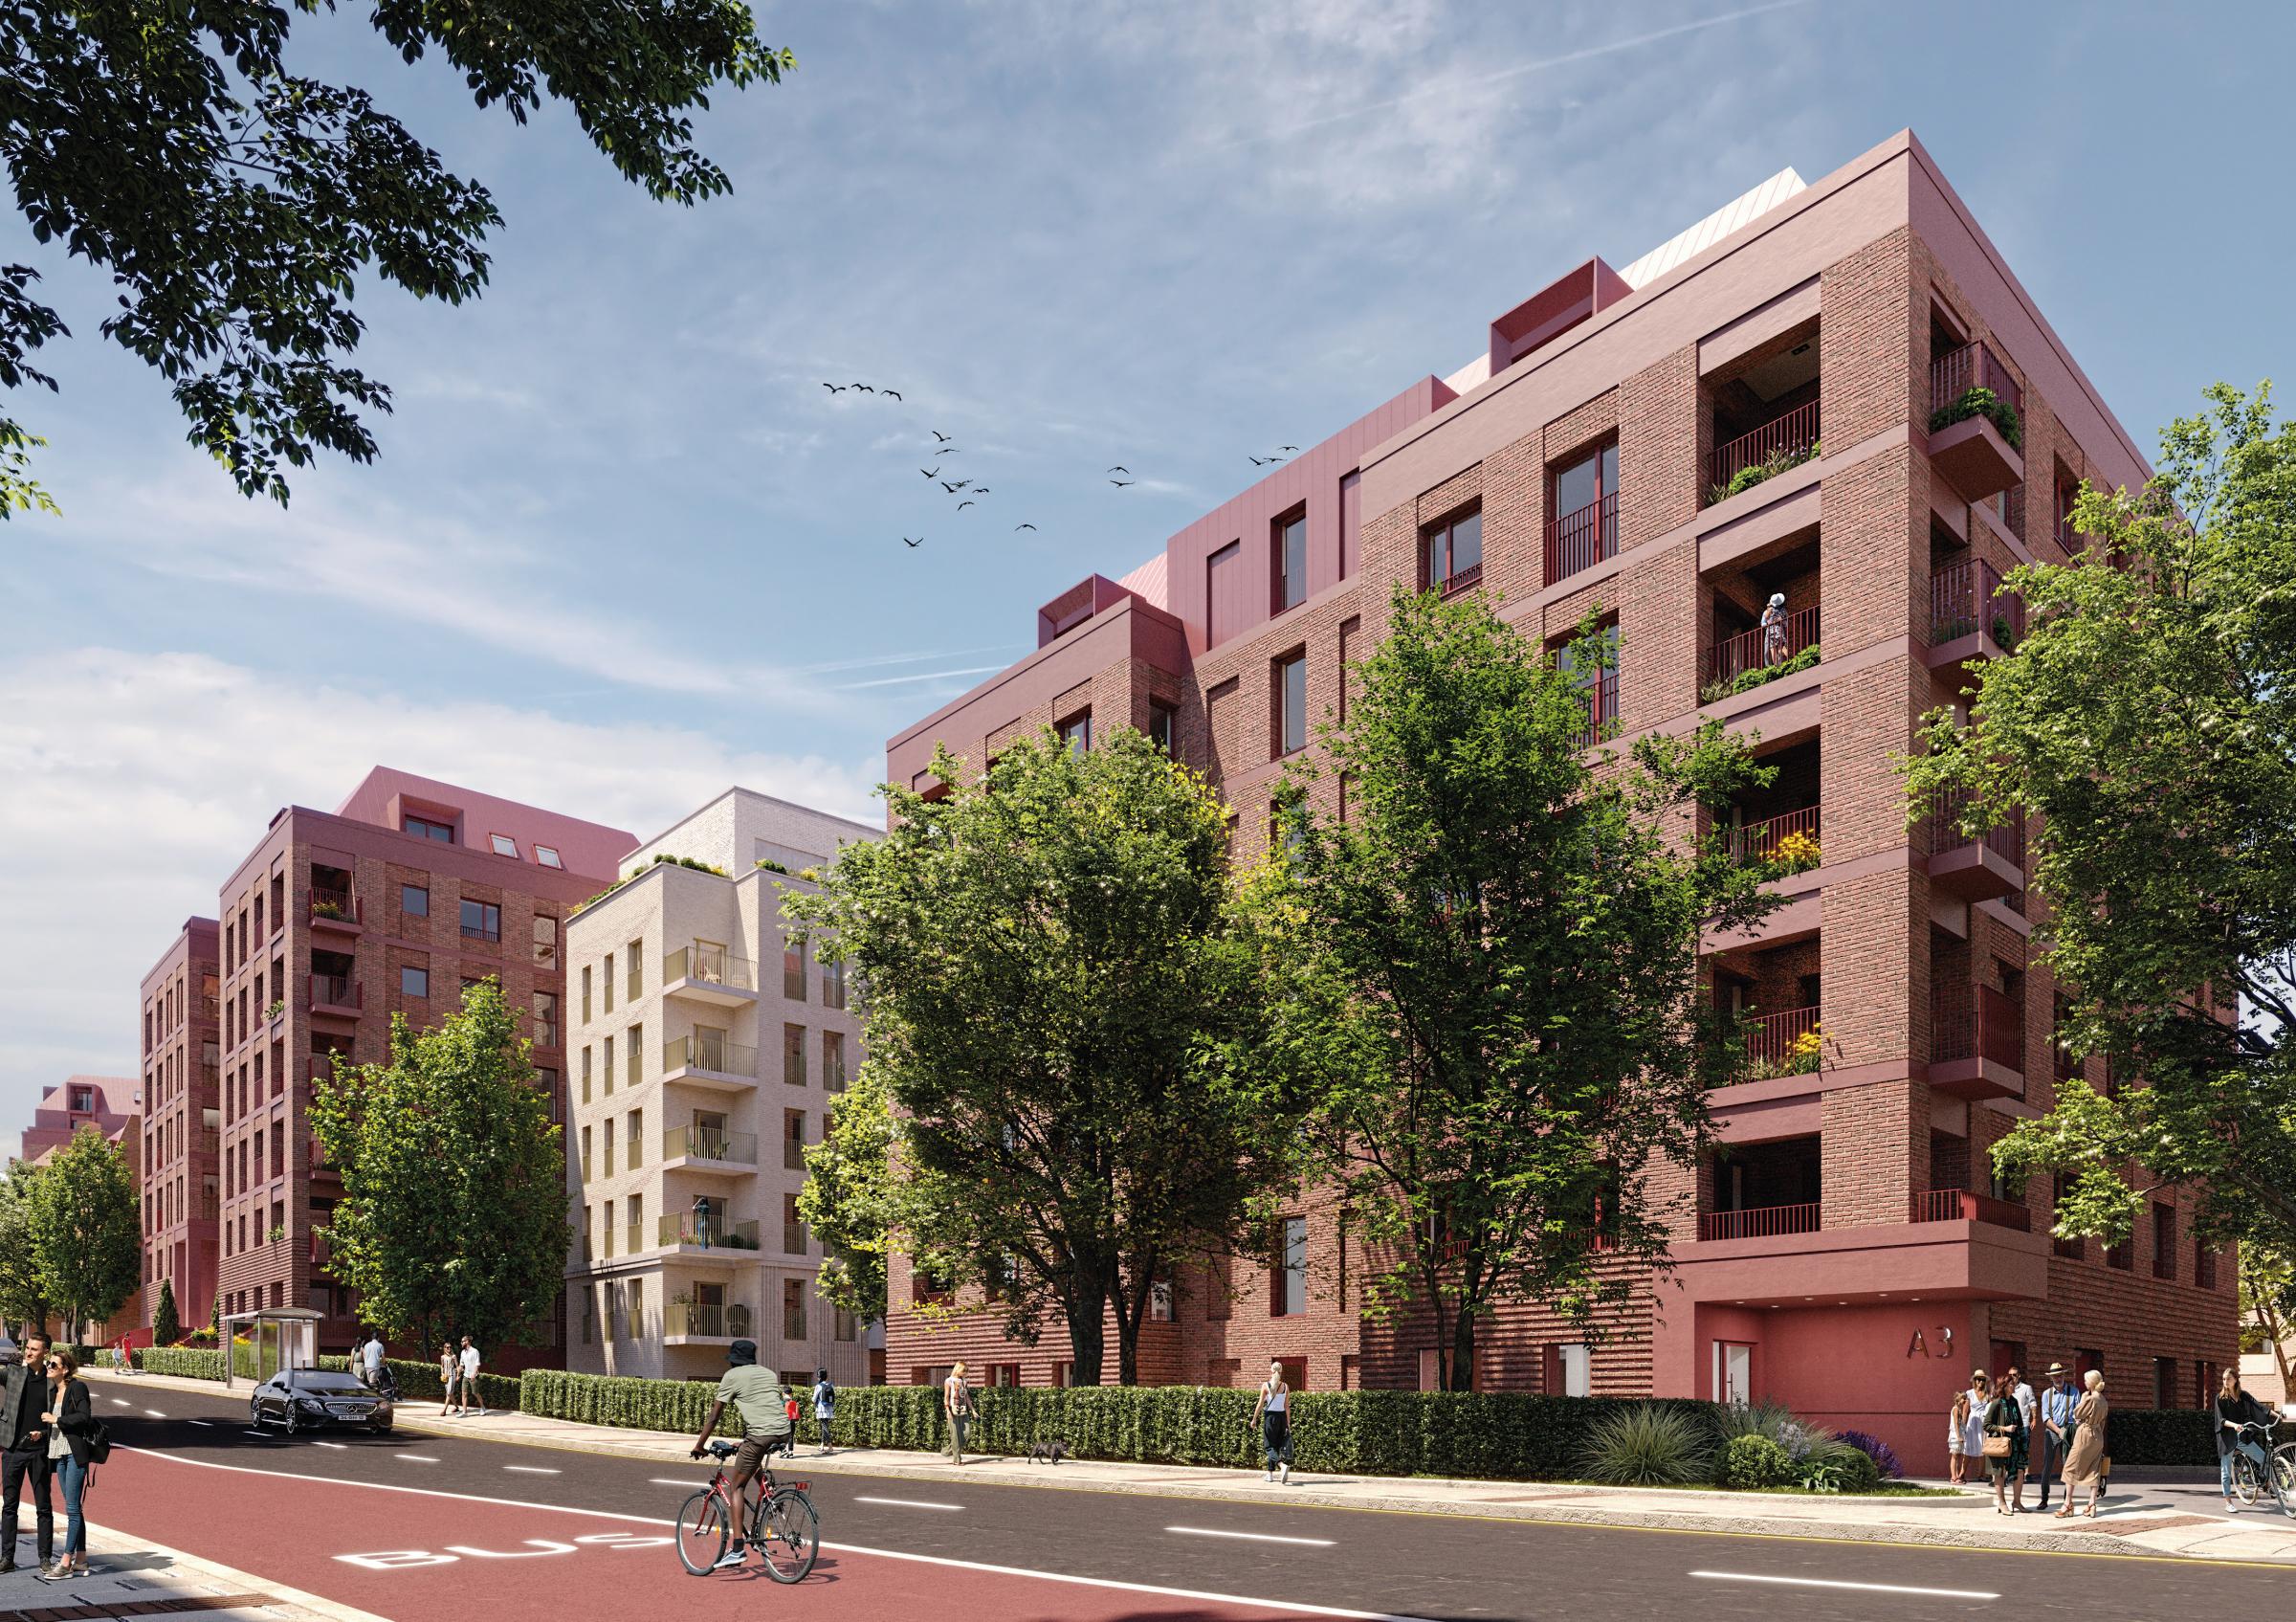 Plans to redevelop Islington's Barnsbury Estate approved